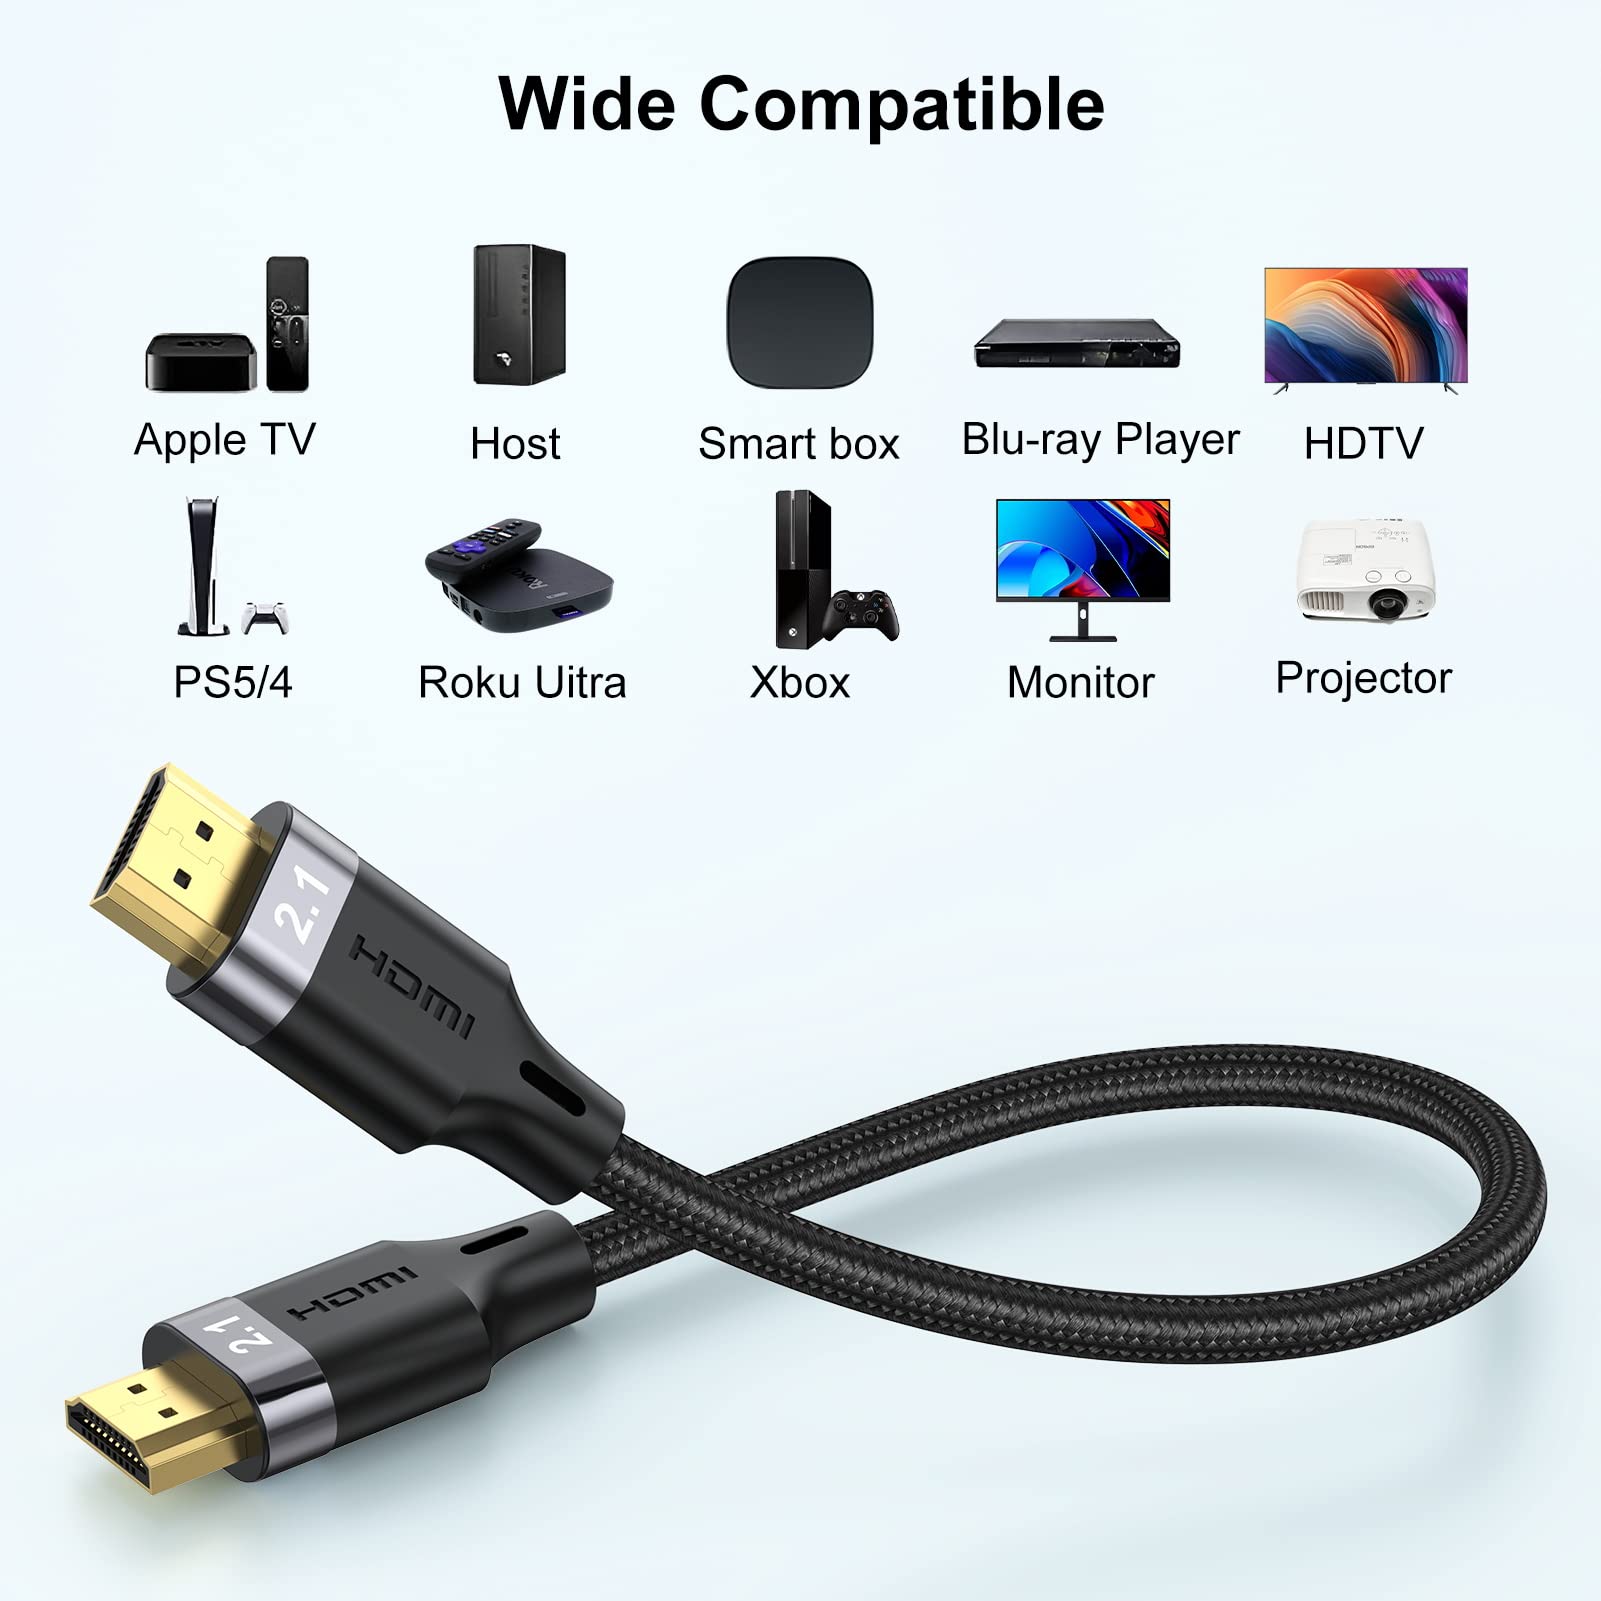 8K HDMI Cable 1 Feet 2-Pack, Short HDMI to HDMI Cable Ultra High Speed HDMI 2.1 Cord (Supports 8K@60Hz, 4K@120Hz, 2K, 1080P, eARC, HDR, 3D) Compatible for Laptop, PC, Monitor, HDTV, PS4/5 and More